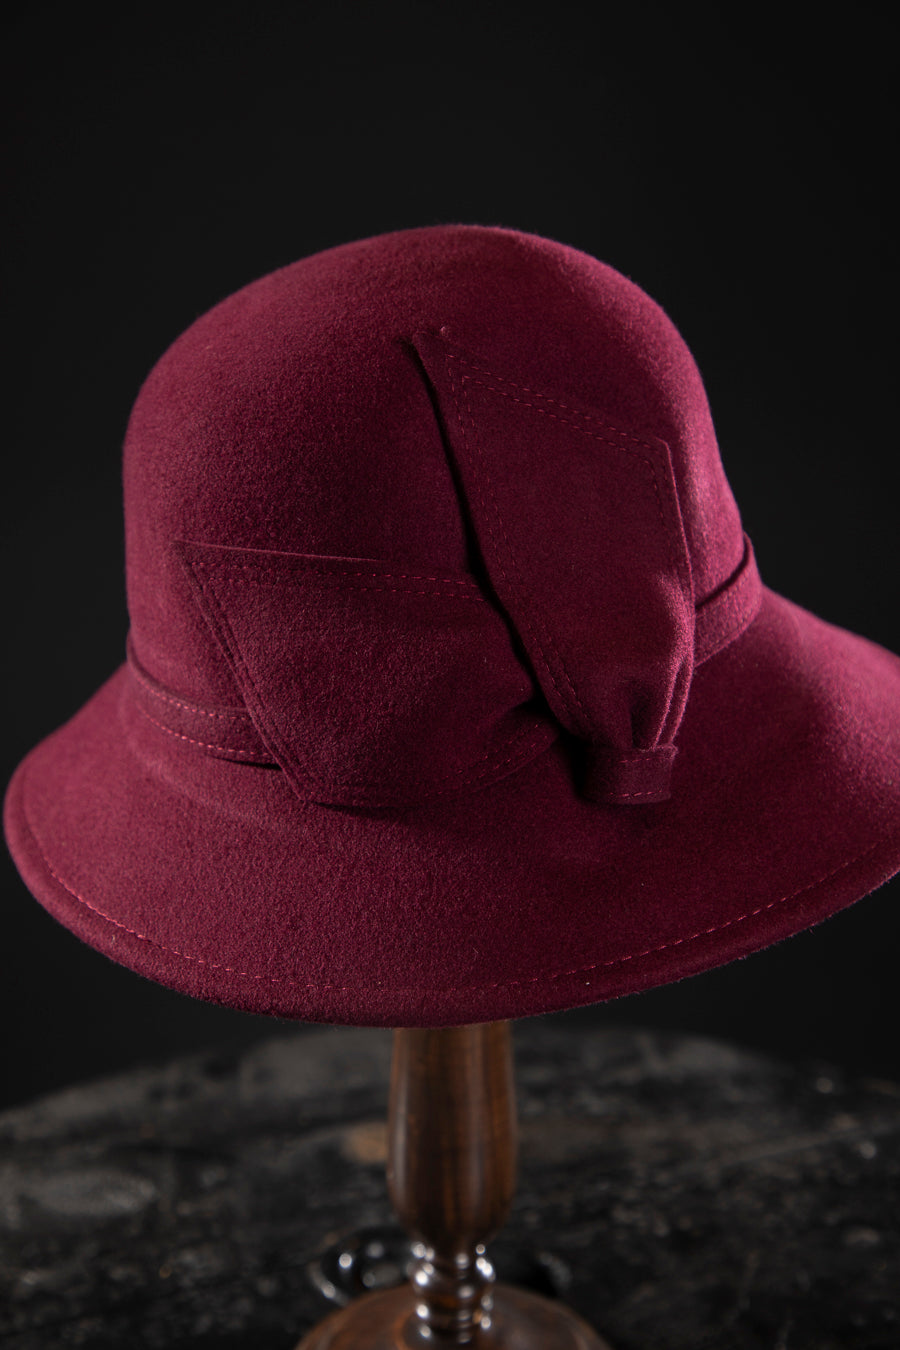 Wool Bell 1920s Cloche - Deluxe, high-quality hats for men and women. Our collection of hats including wool felt top hats, fedoras, bowlers, caps, fedoras, trilbys, cloches and more are a wonderful addition to a 1920s Gangster or Gatsby costume, or the perfect fashion accessory. Shop online, or visit our Mornington hat store to see all that we have to offer.